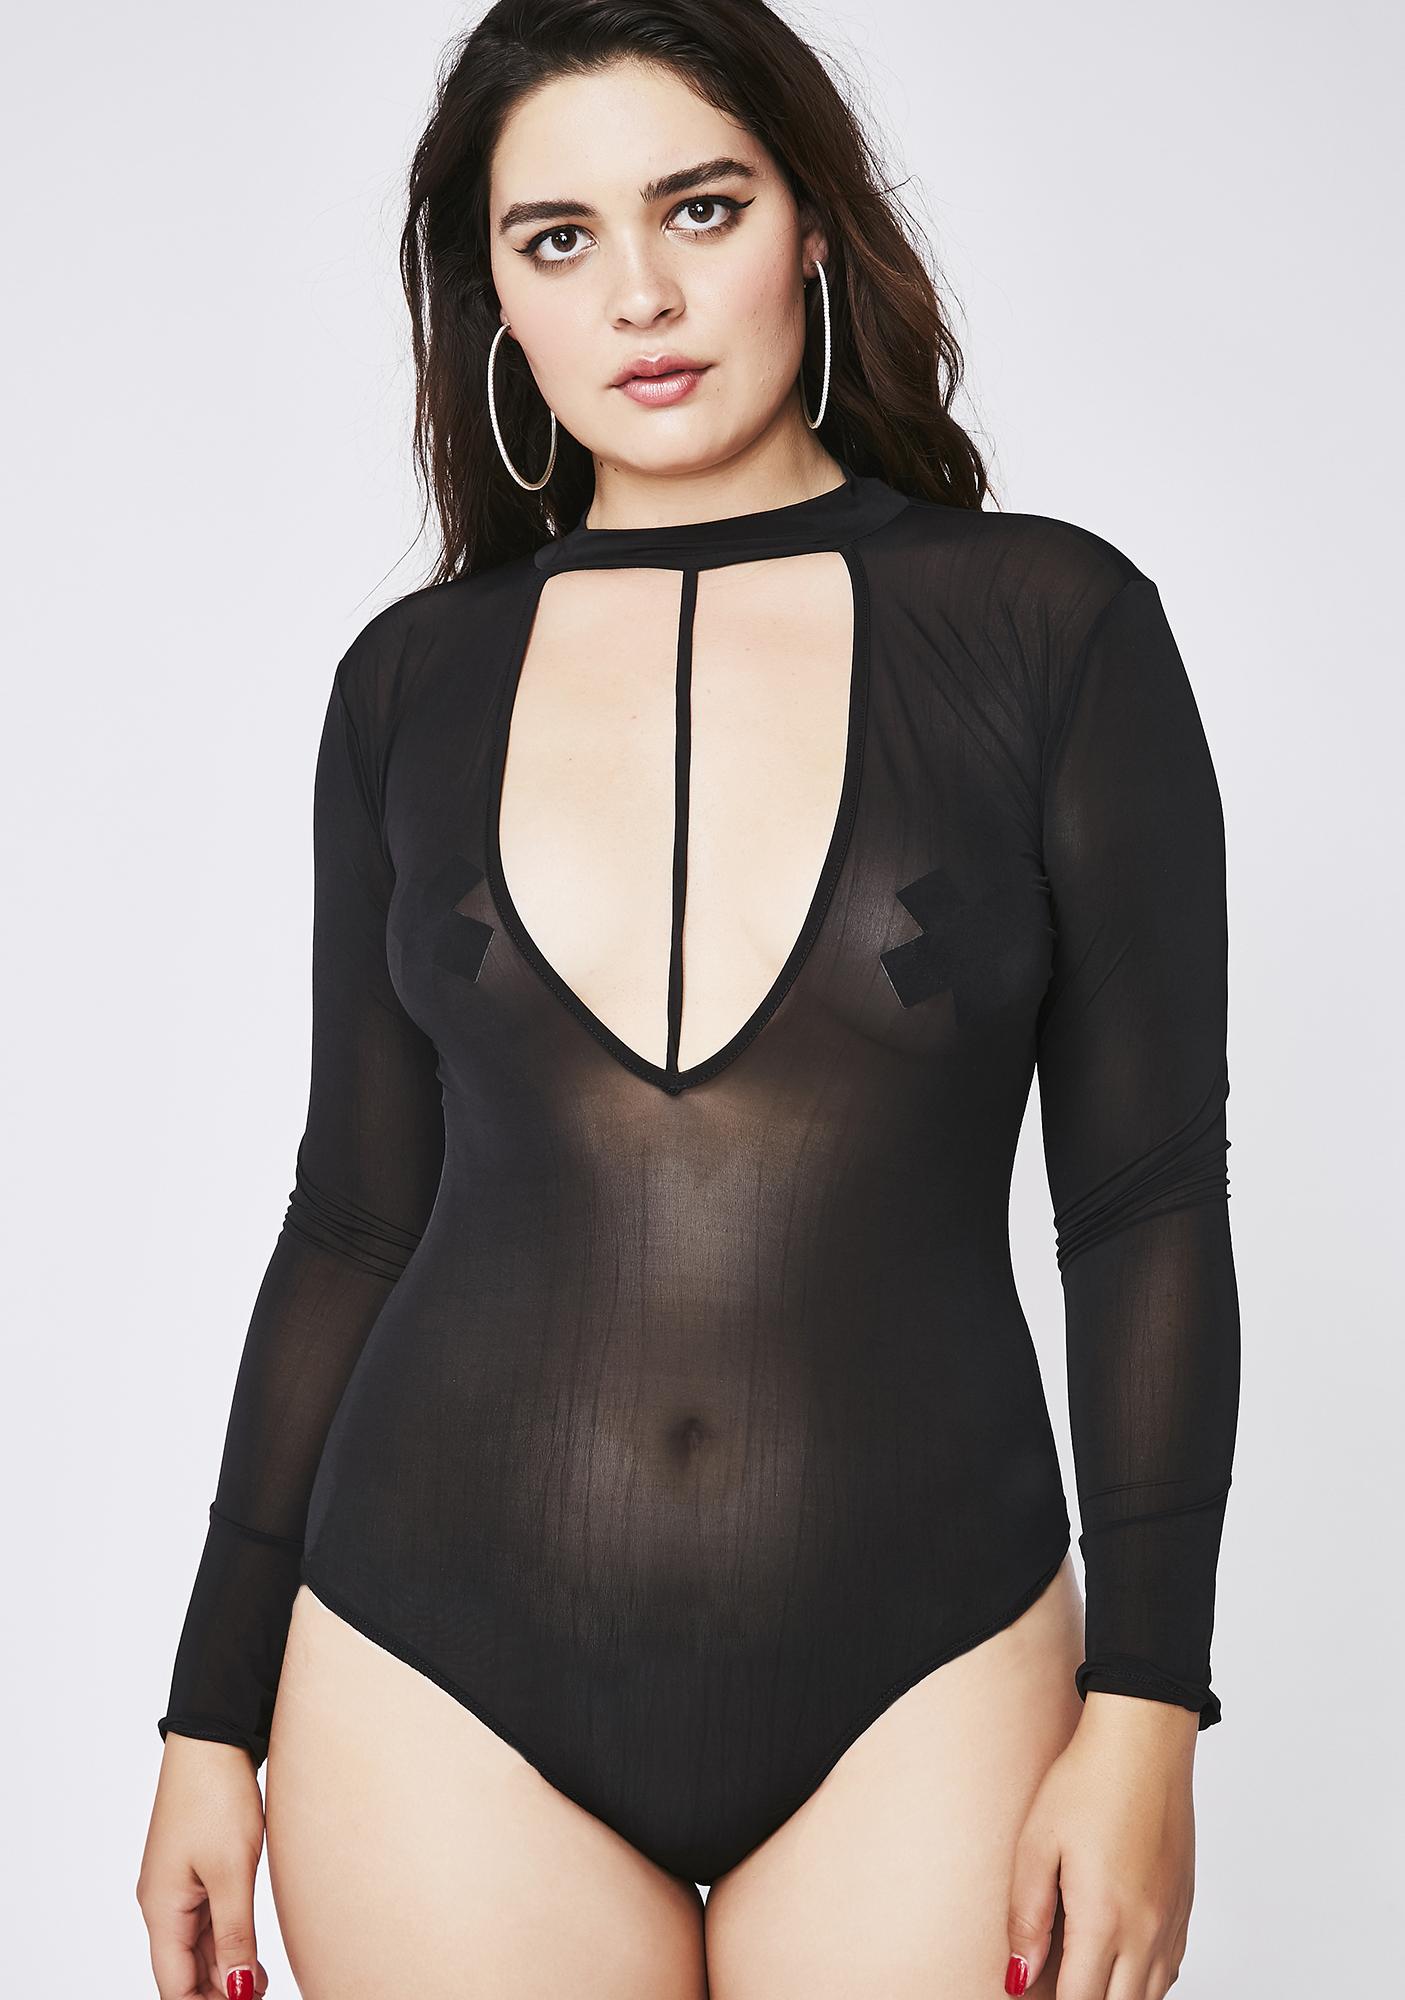 Go Off Sheer Bodysuit cuz you're goin' for the kill. 